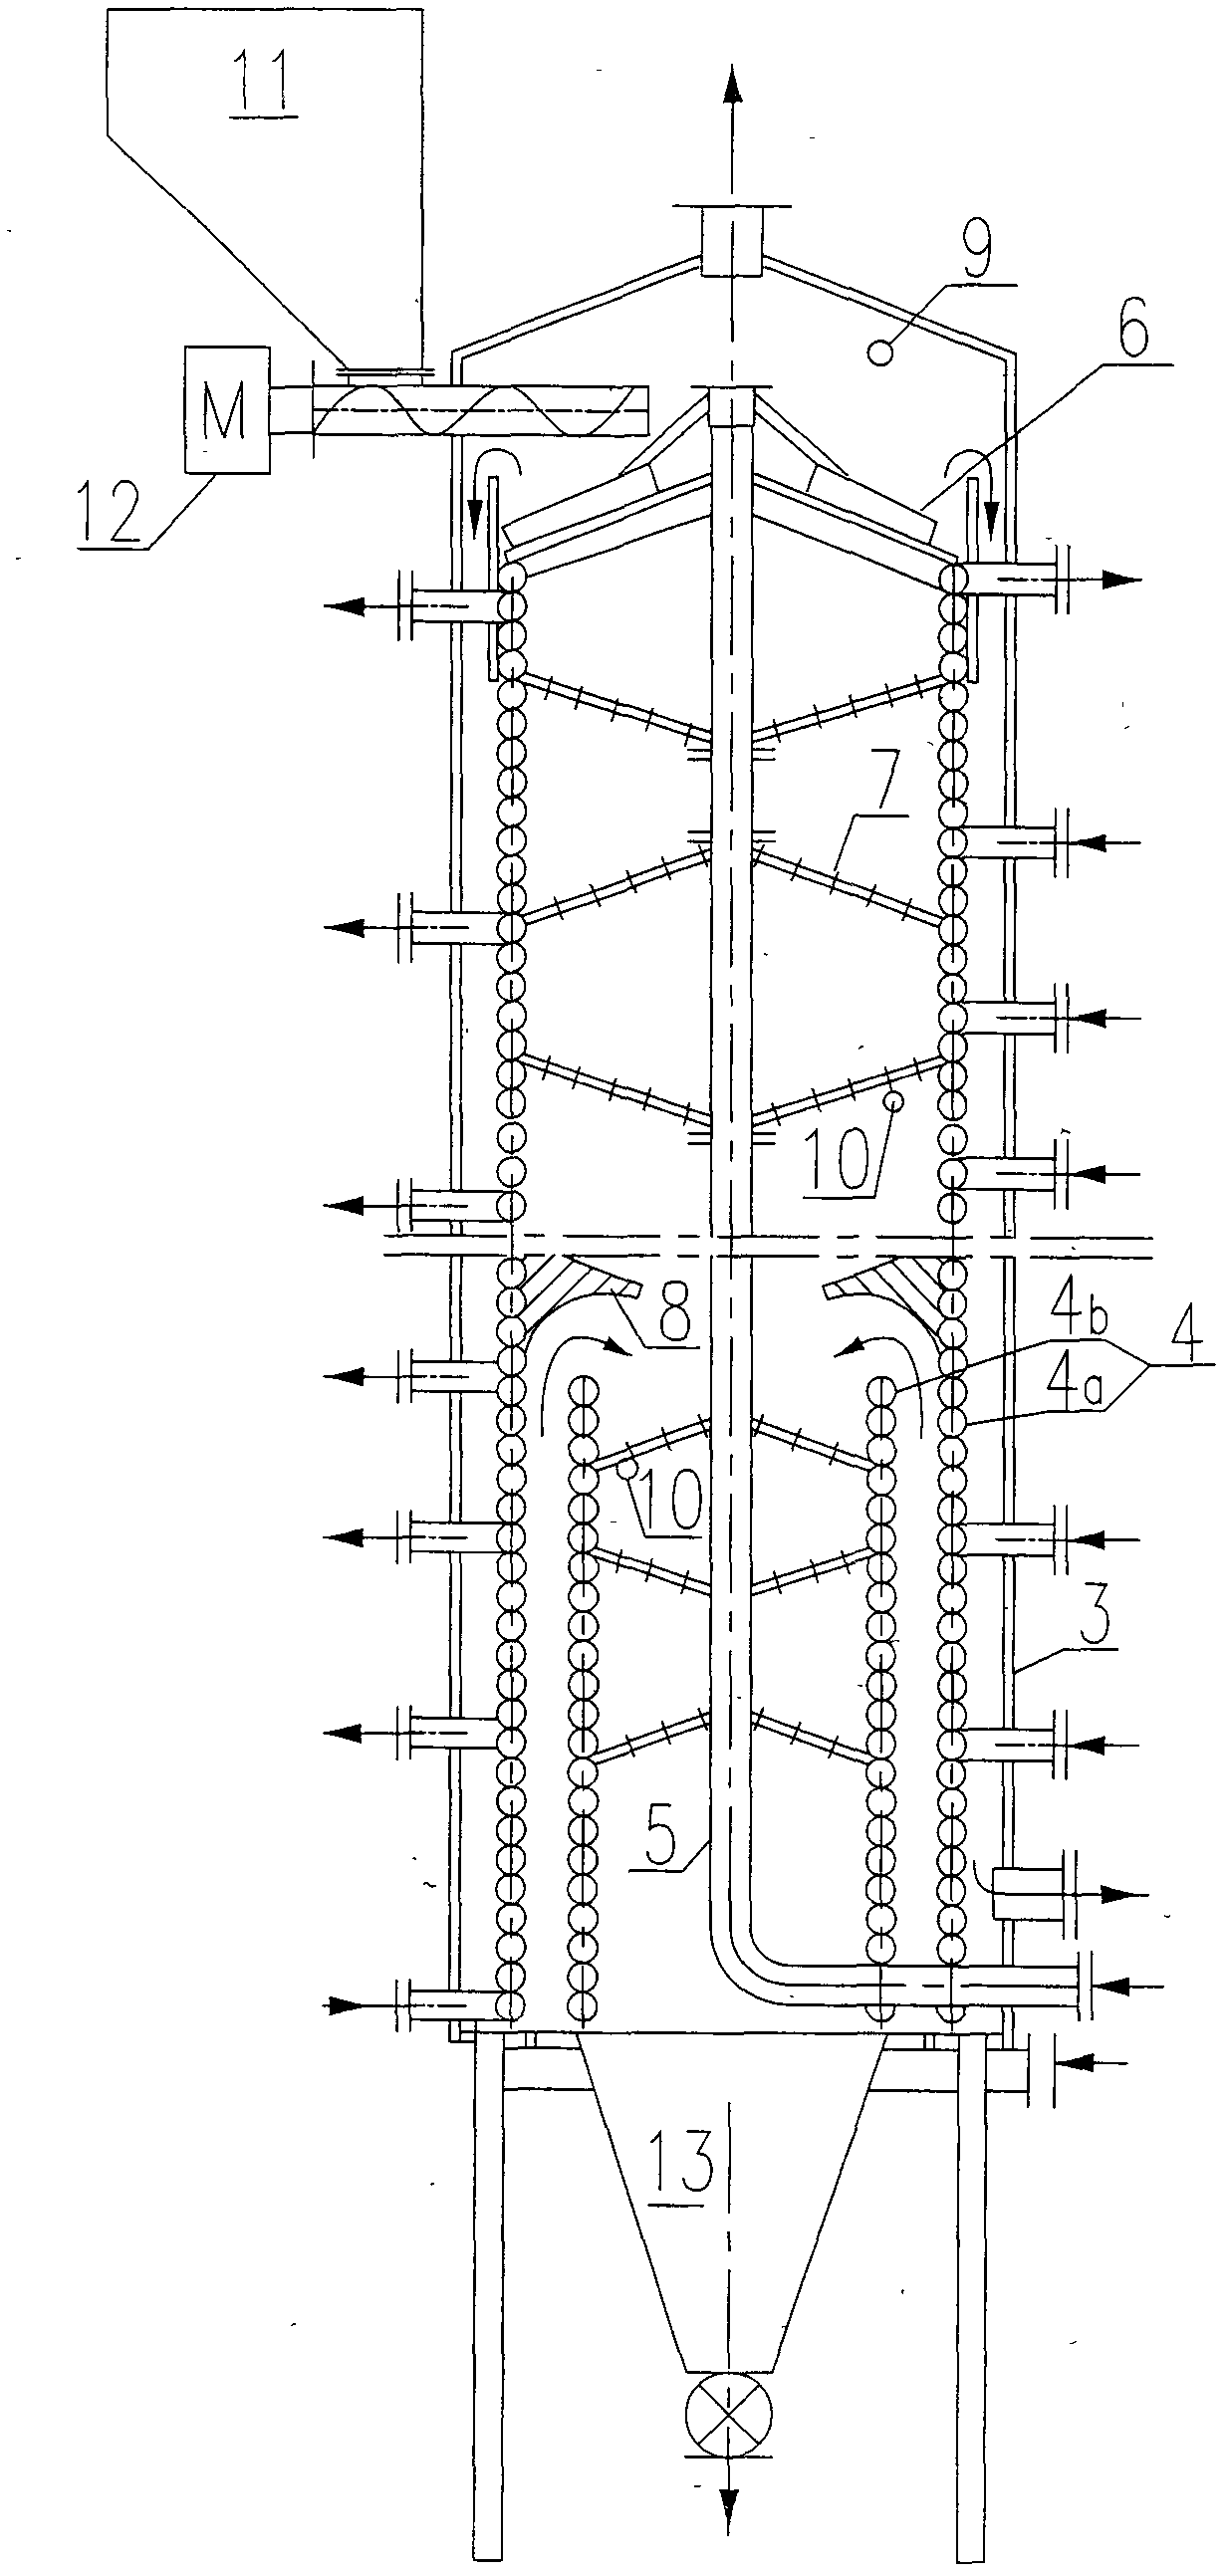 Device used for drying materials by aid of low-pressure superheated steam